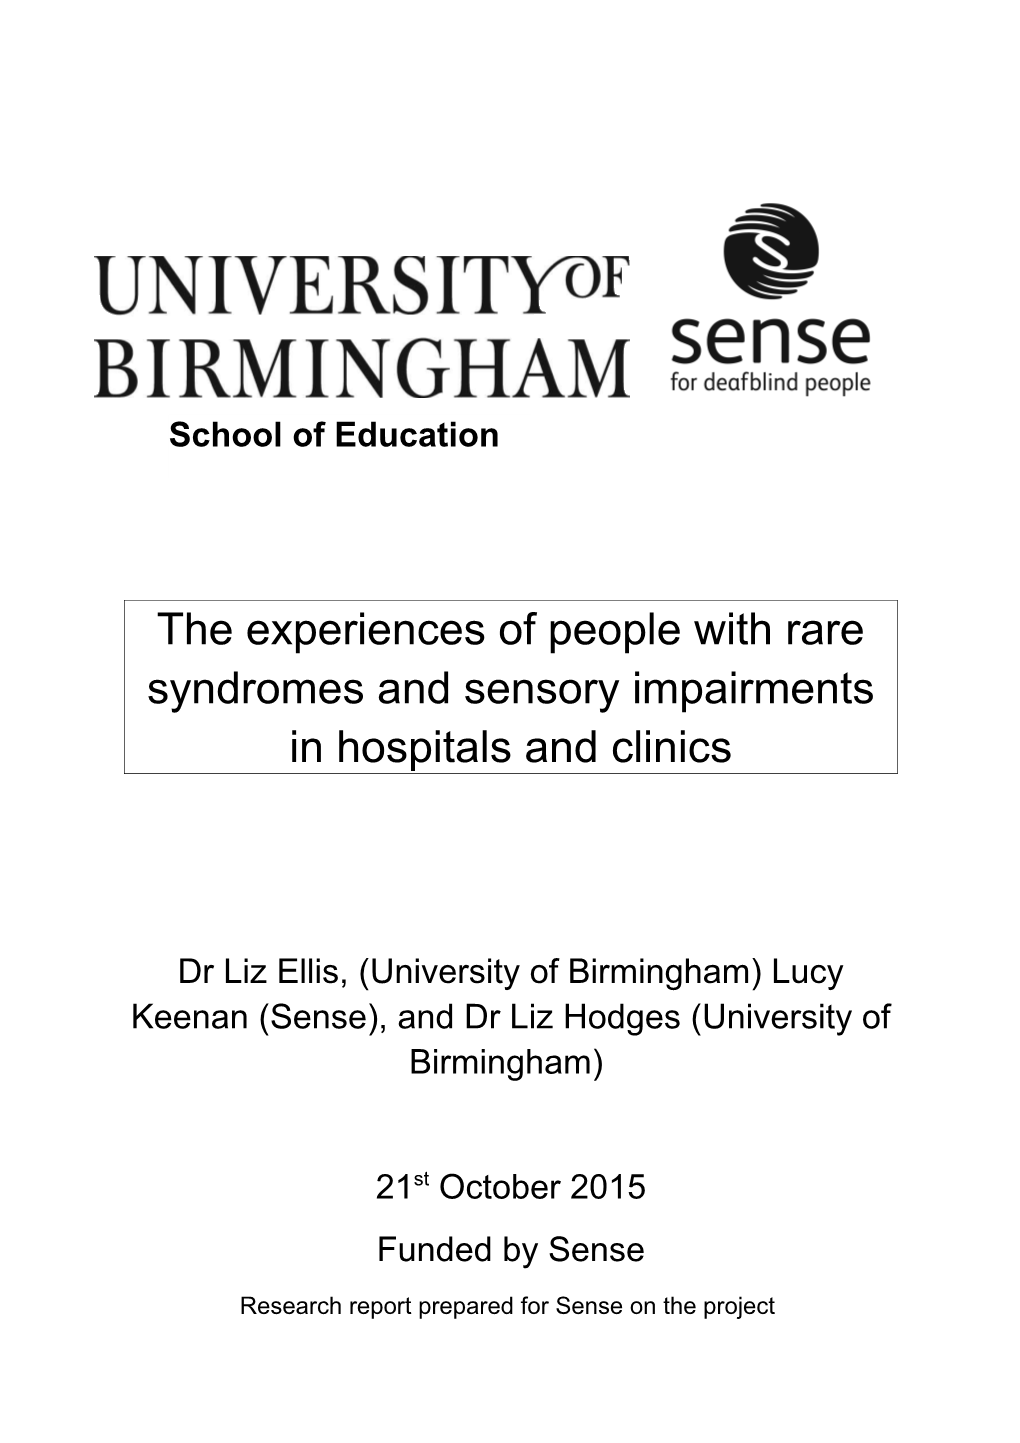 The Experiences of People with Rare Syndromes and Sensory Impairments in Hospitals and Clinics